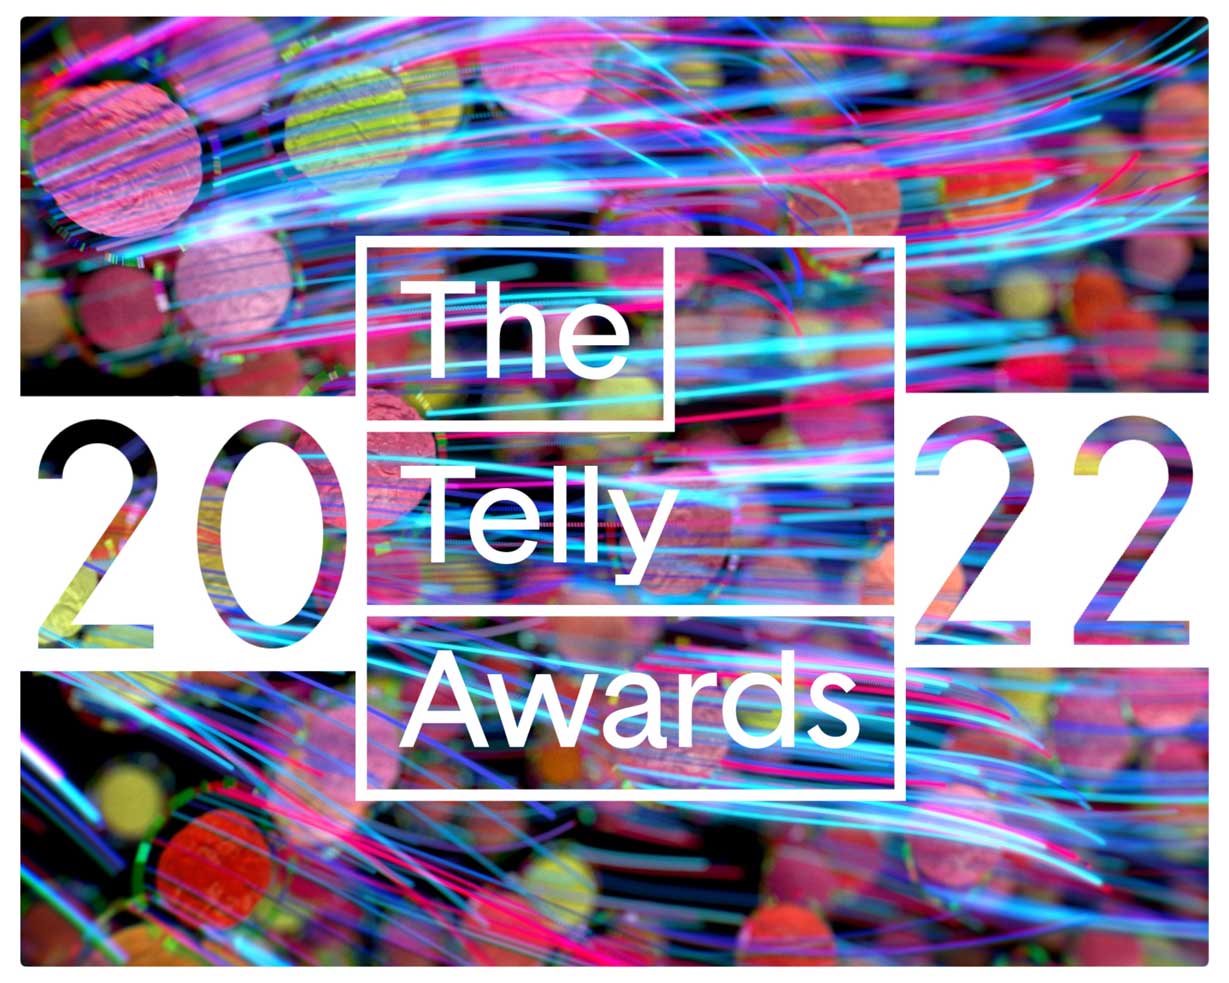 Telly-Awards-Post-2022-Microverse-Studios-Collage